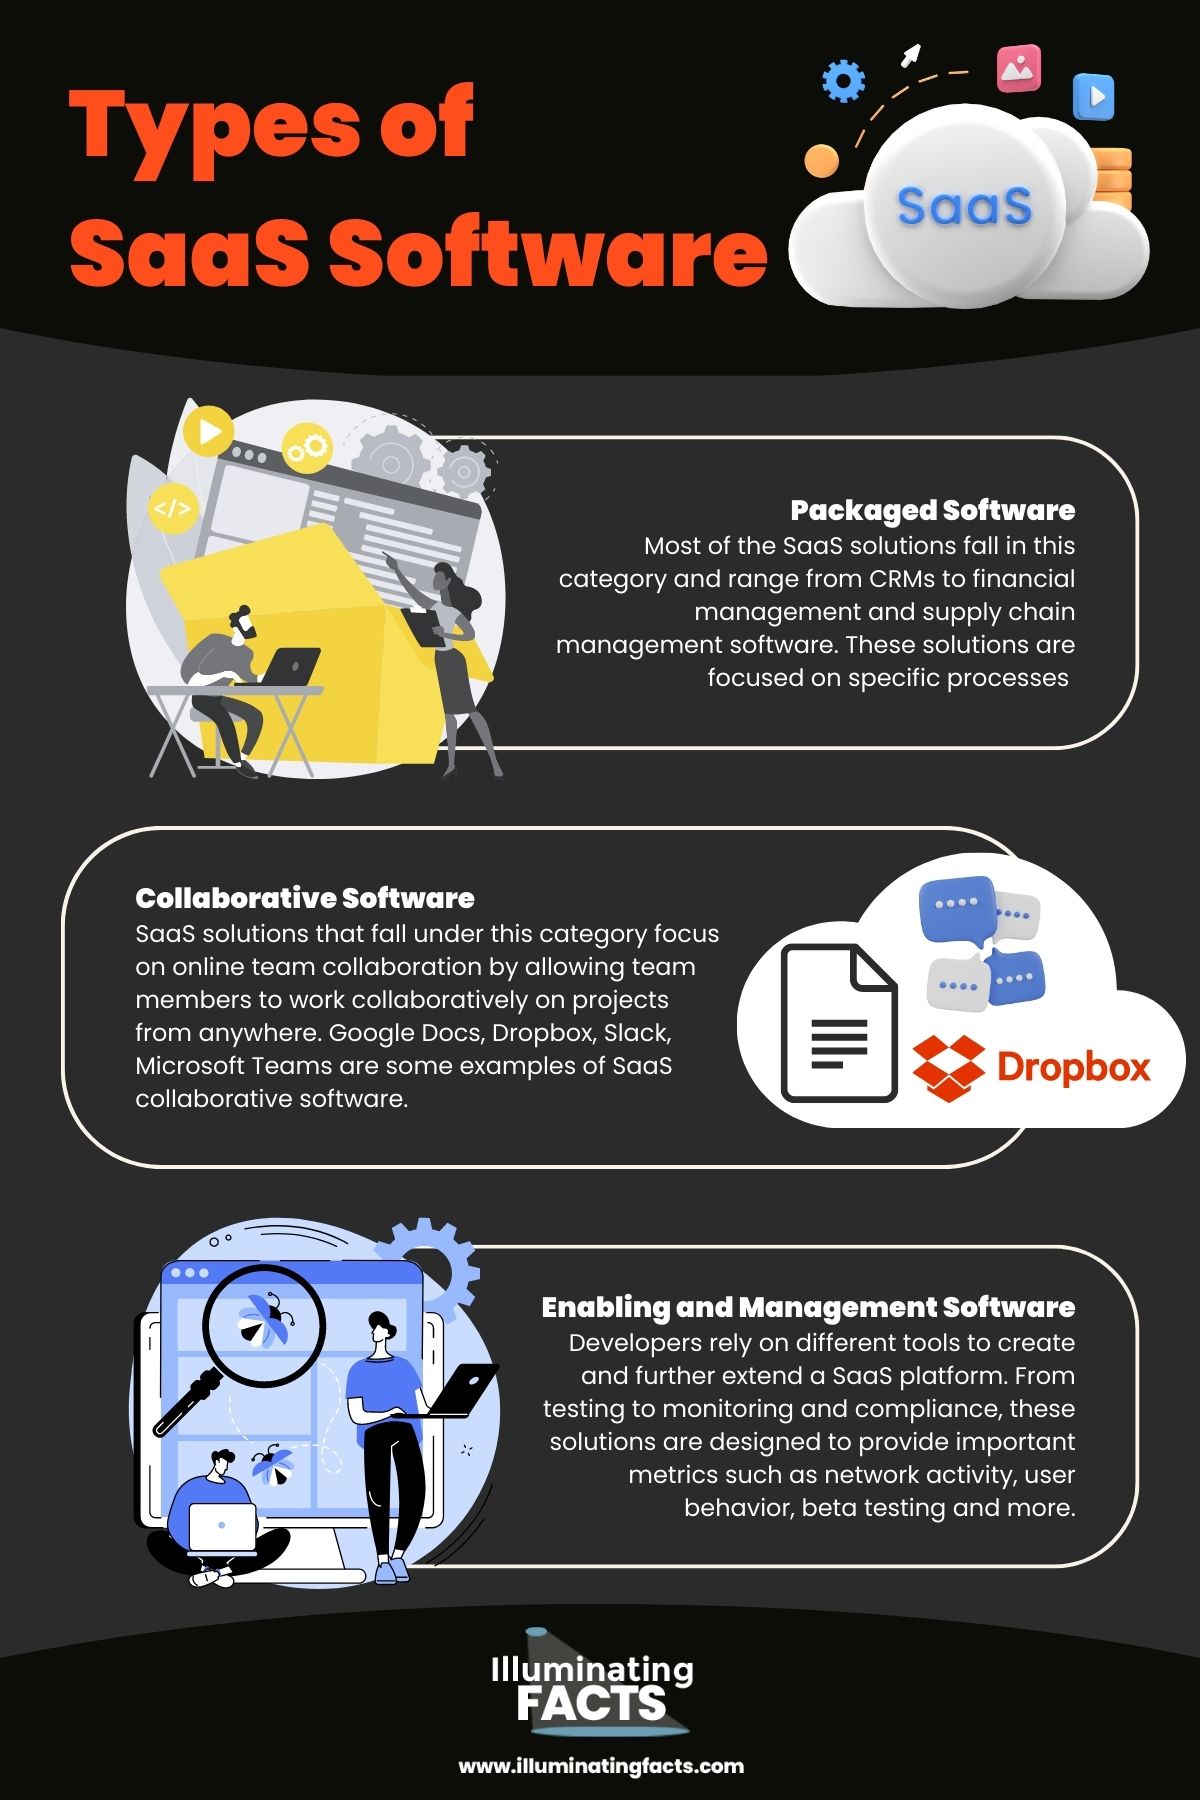 An infographic about the types of SaaS software.